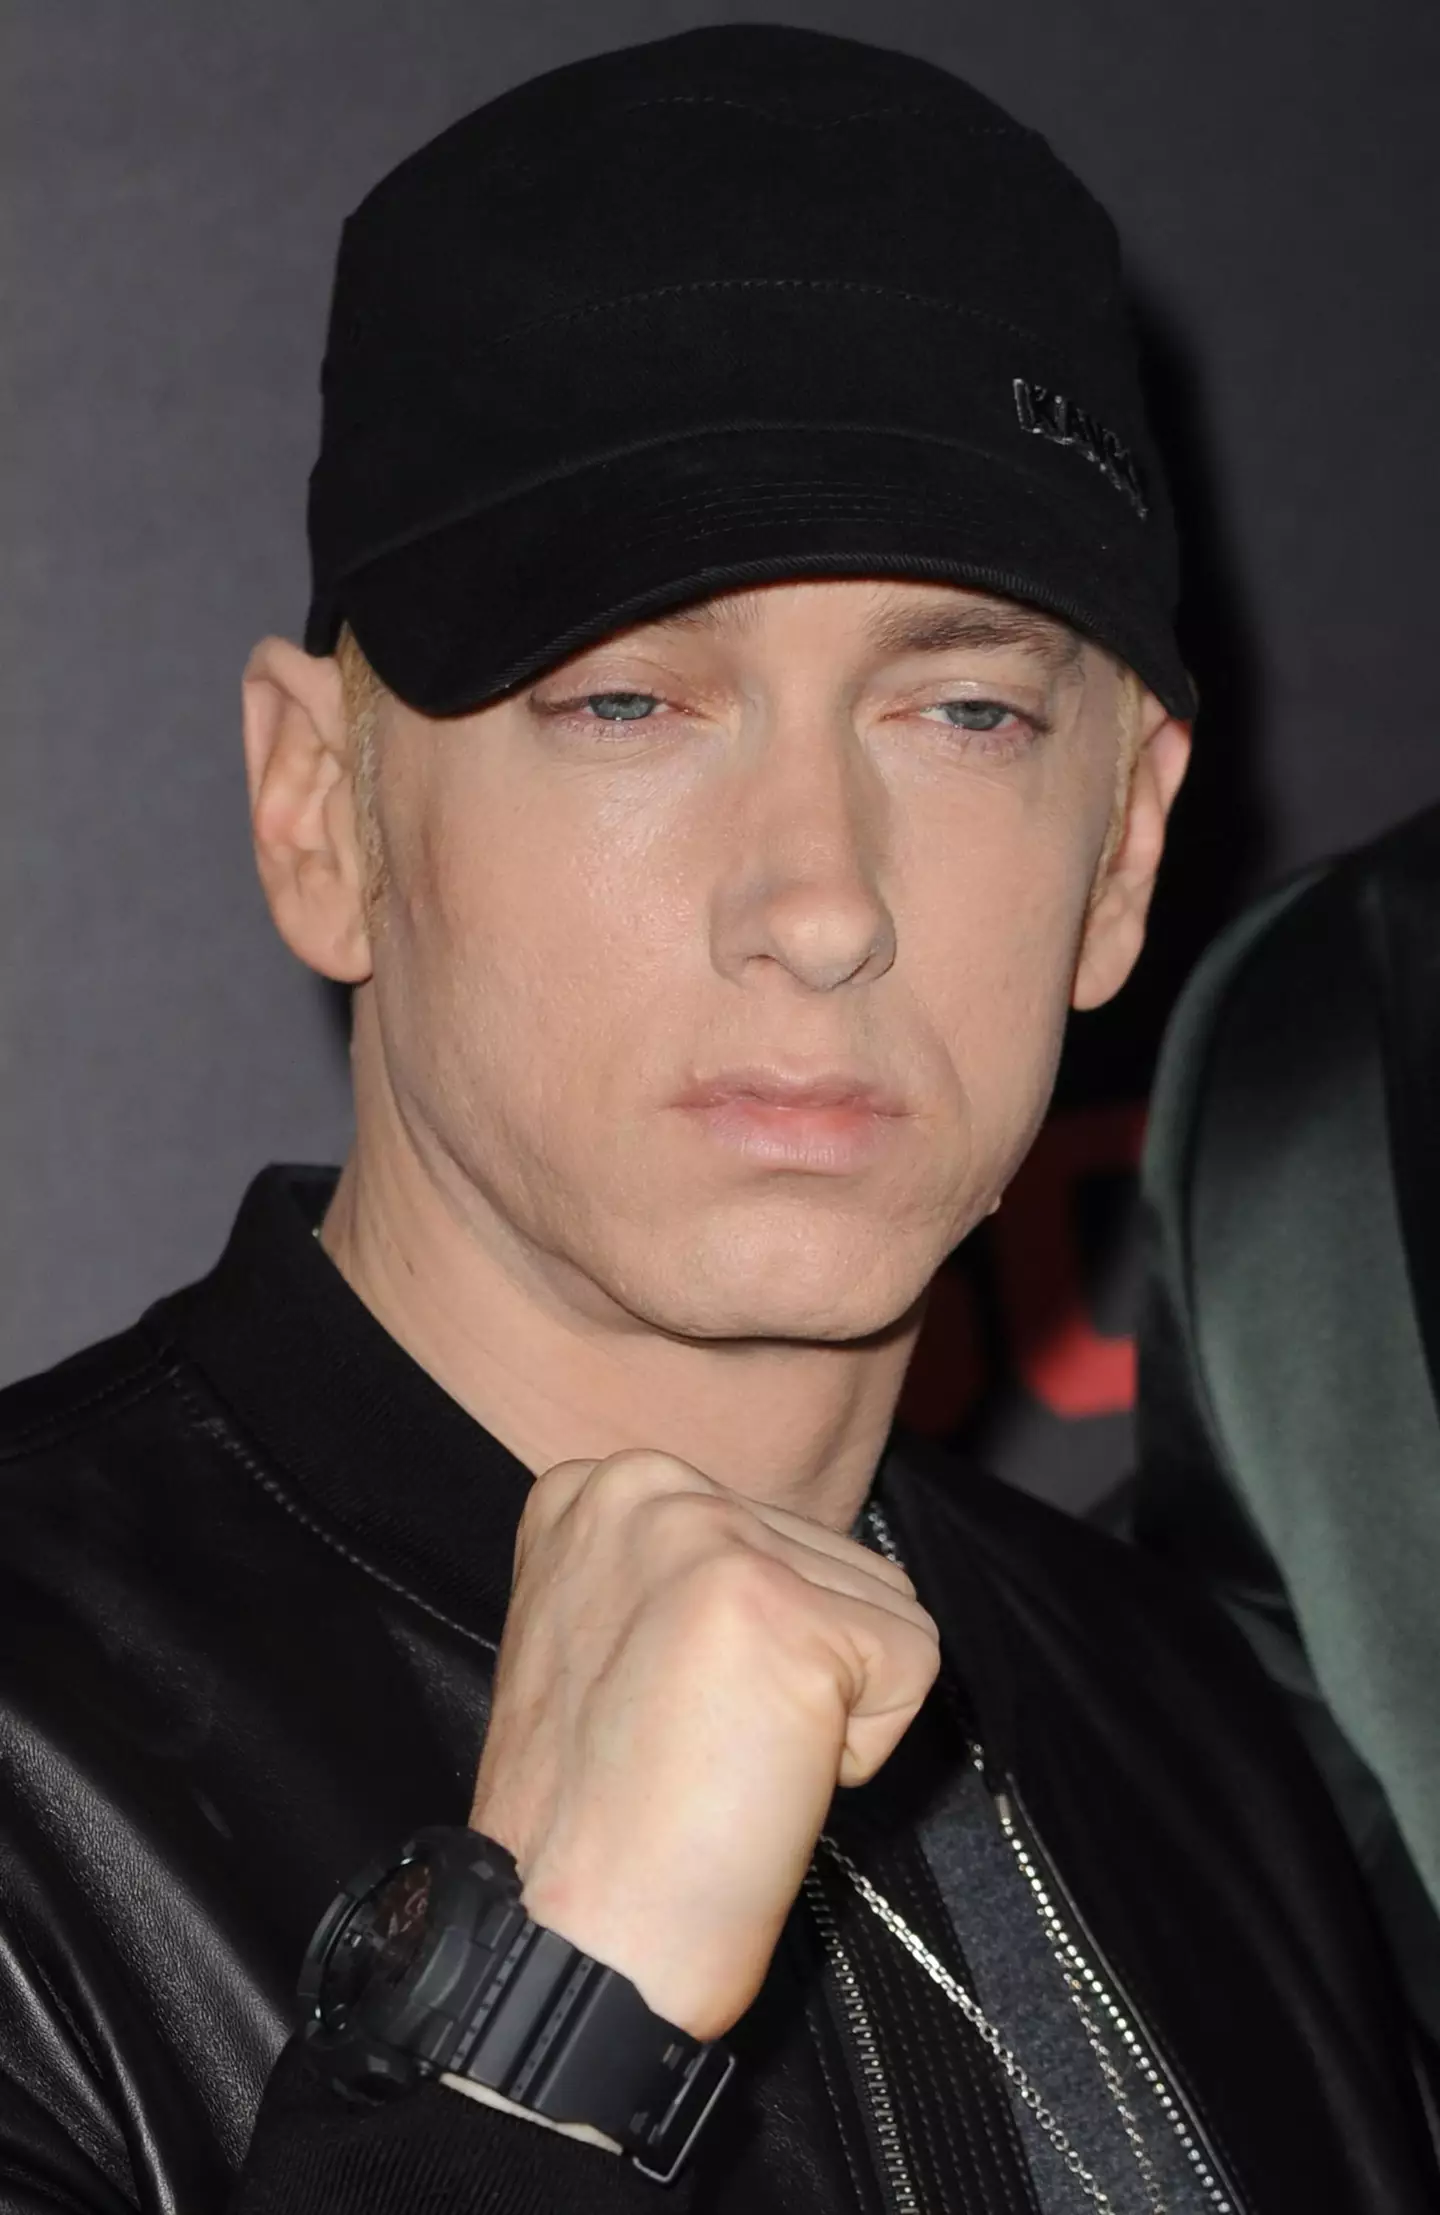 Would the surprise wedding have gone down well with Eminem?